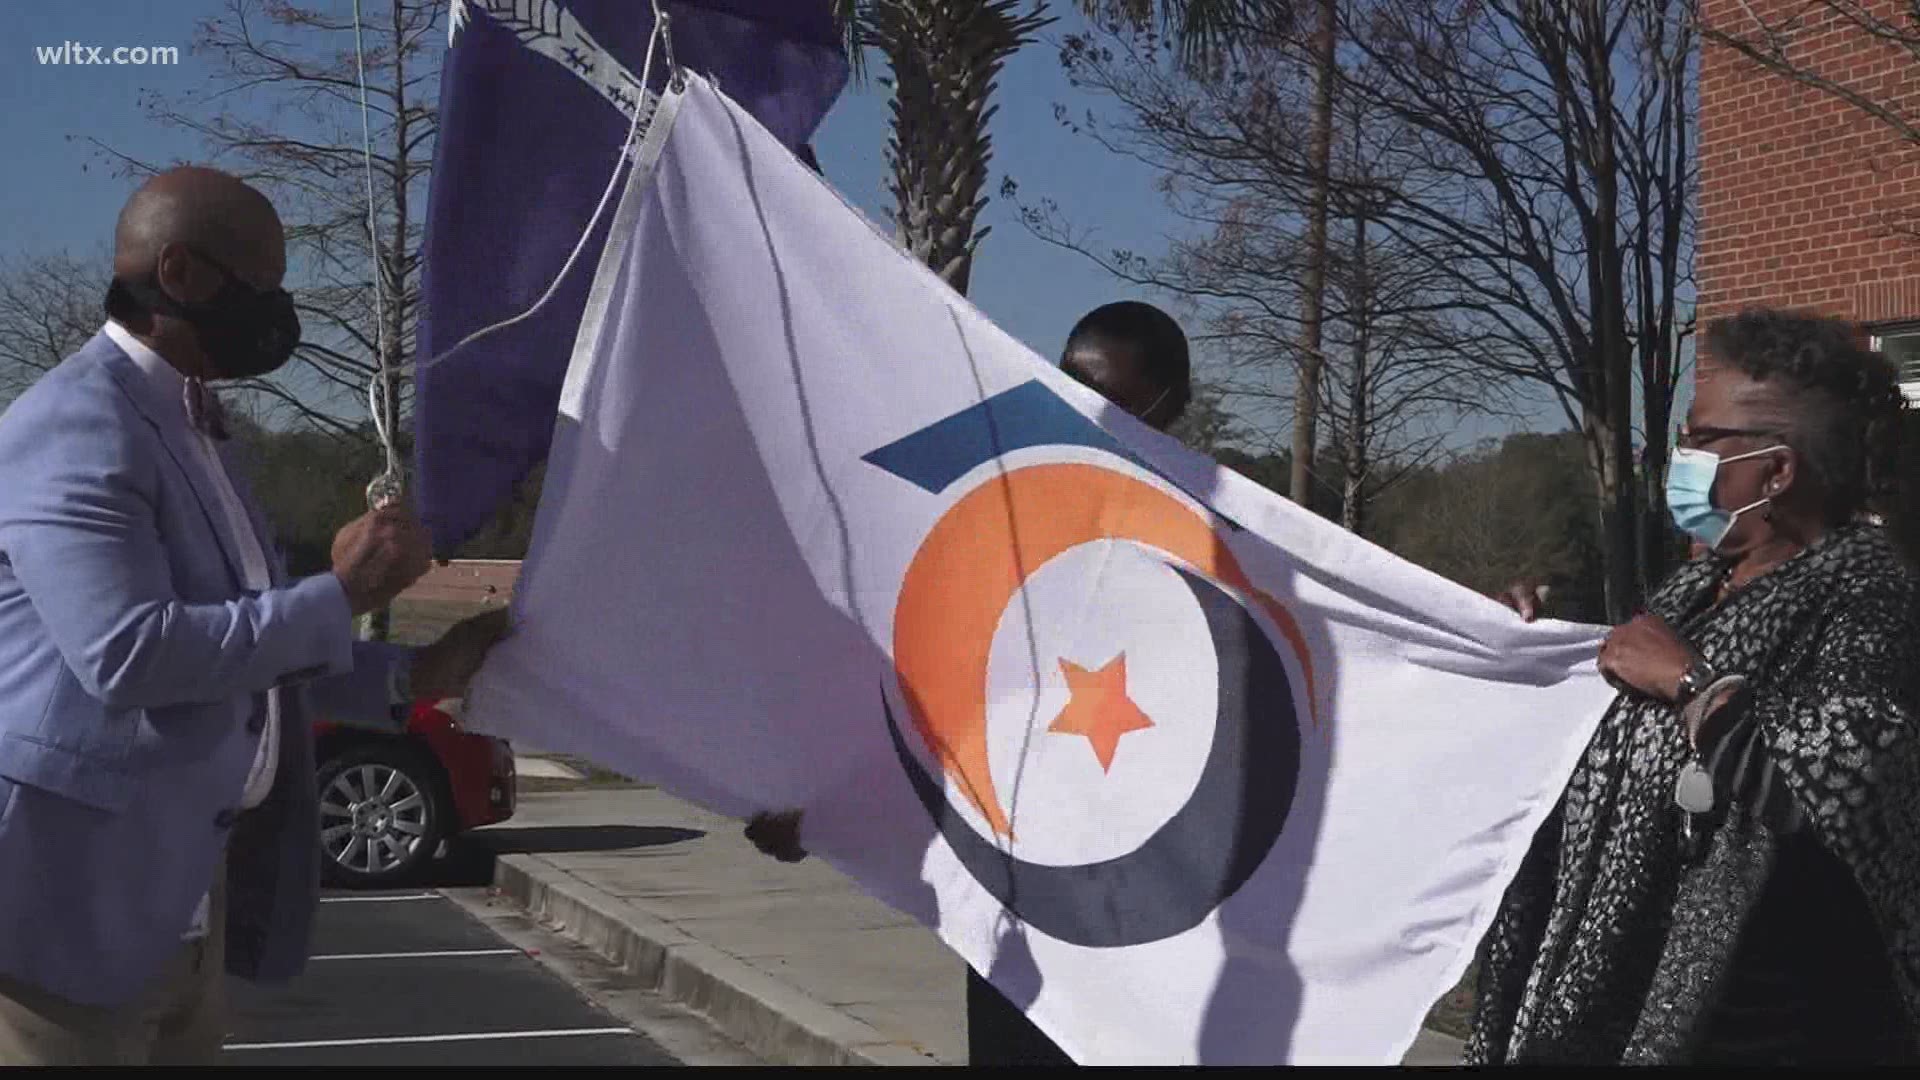 The school district held an unfurling of the new flag on Thursday.